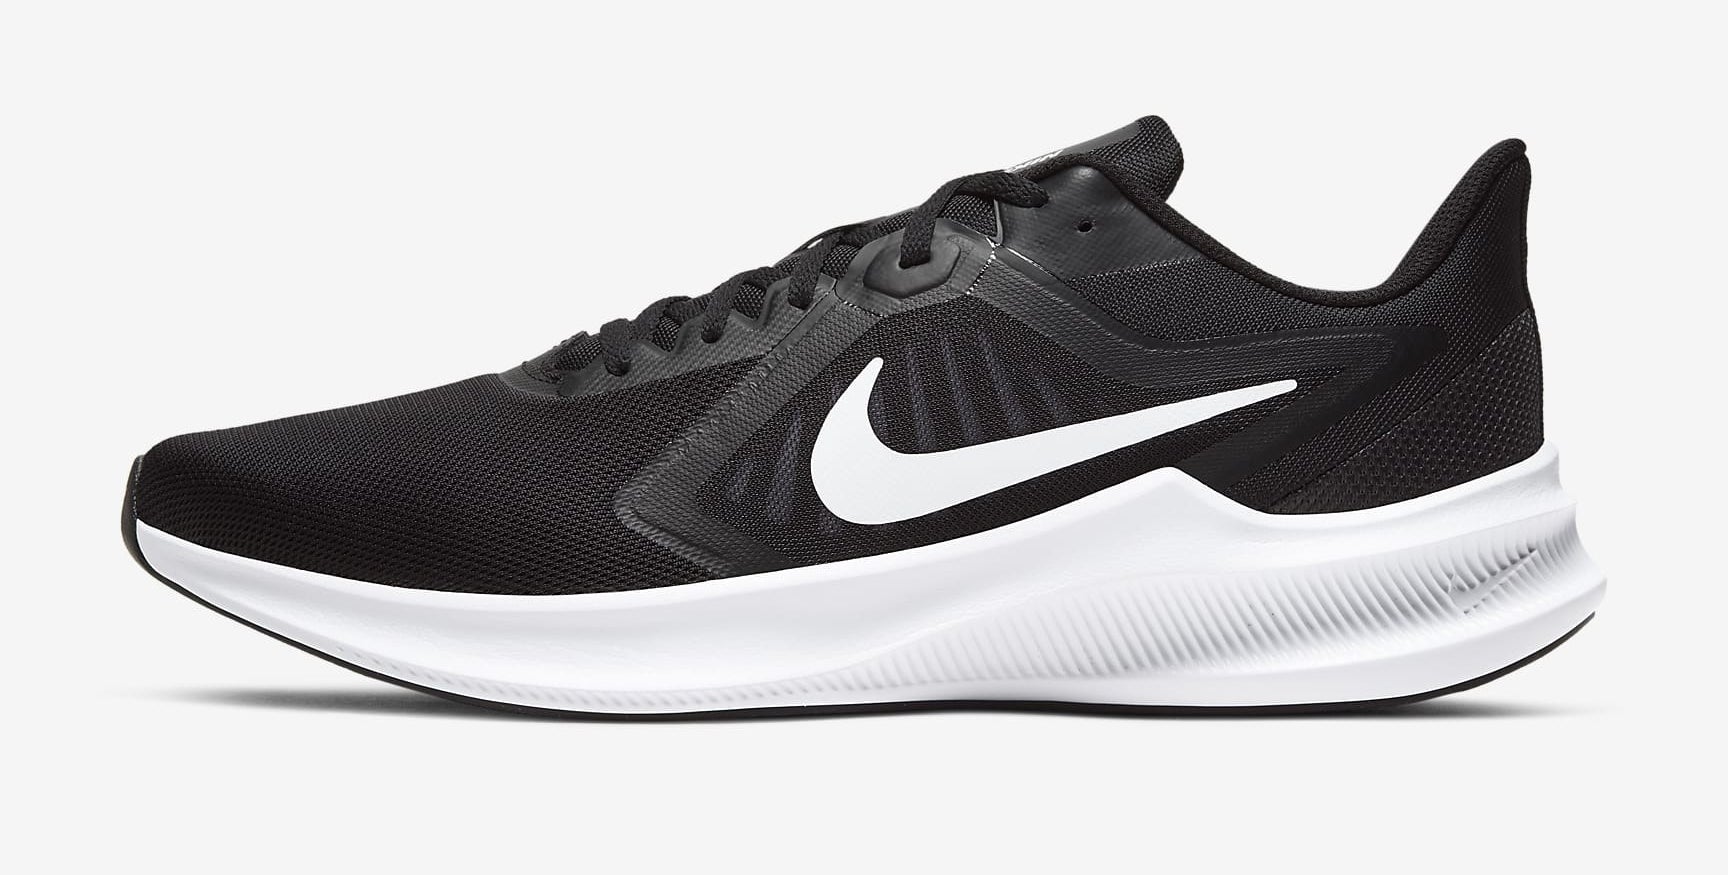 A black and white running sneaker